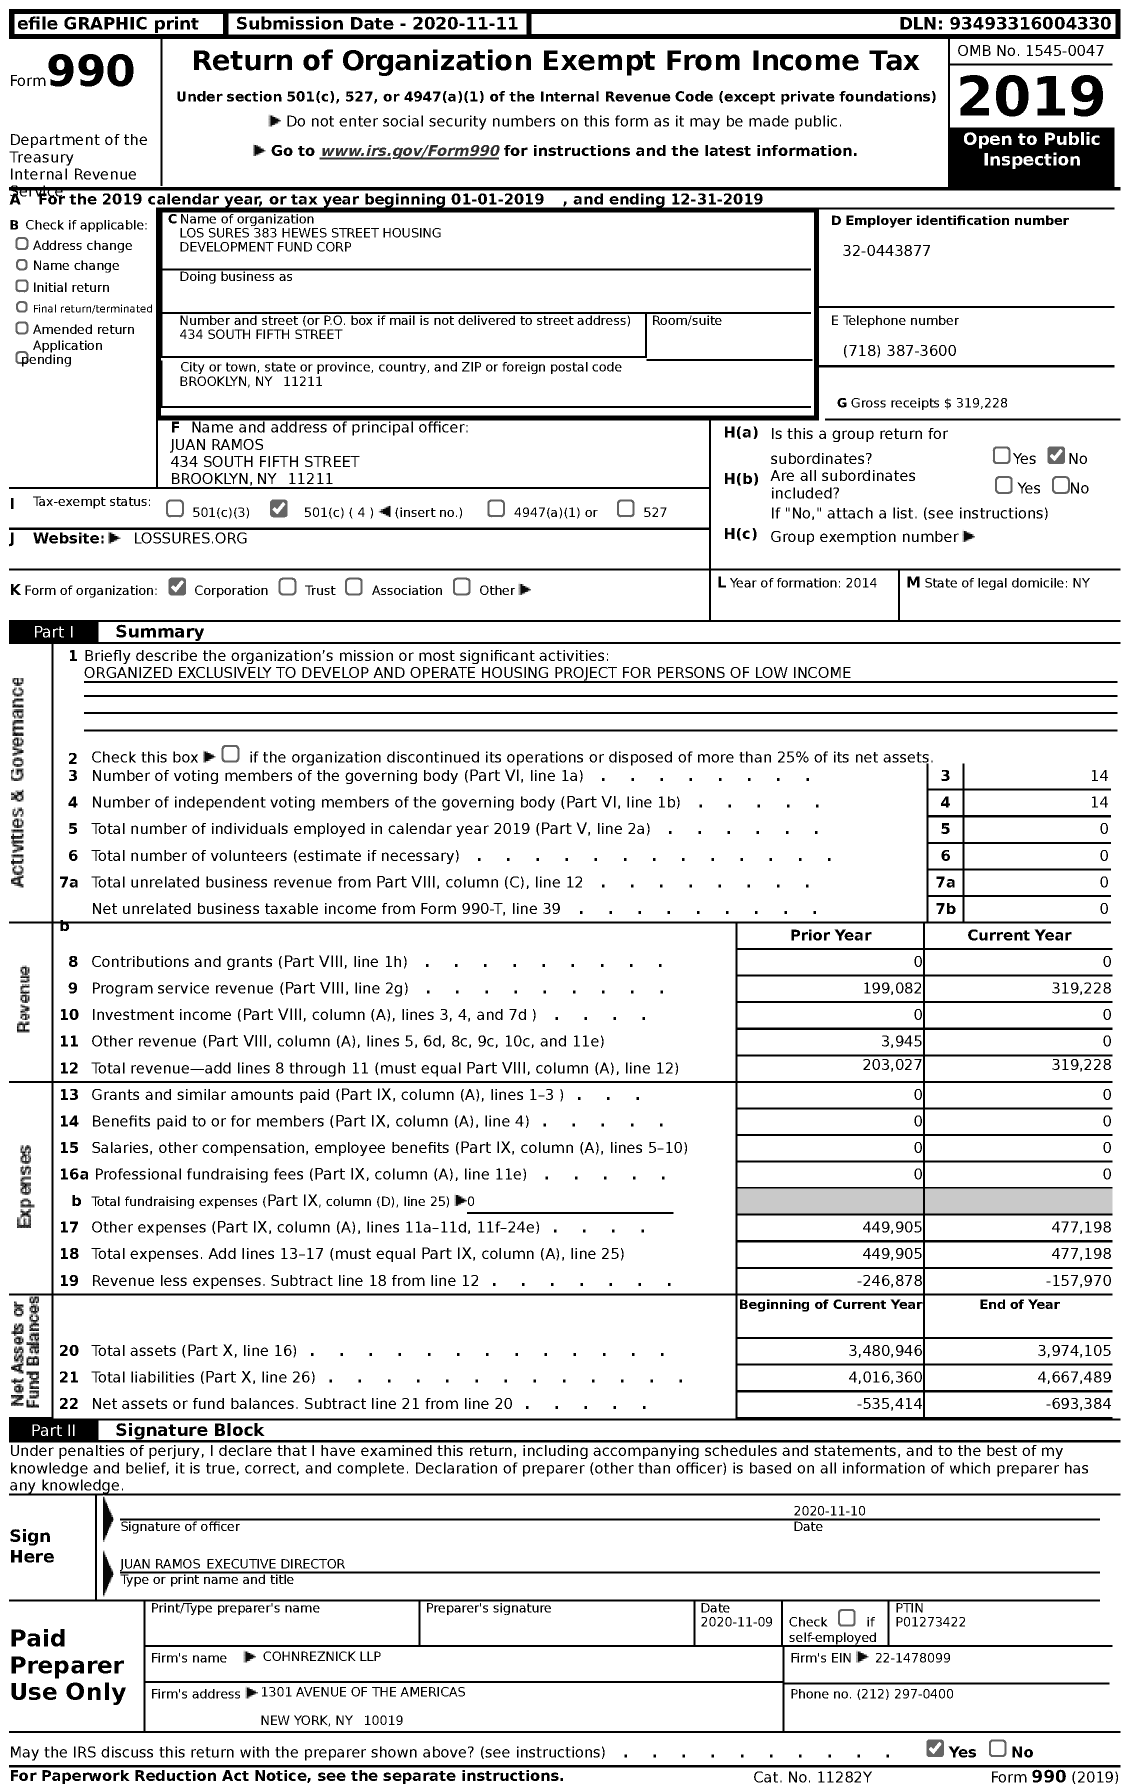 Image of first page of 2019 Form 990 for Los Sures 383 Hewes Street Housing Development Fund Corporation